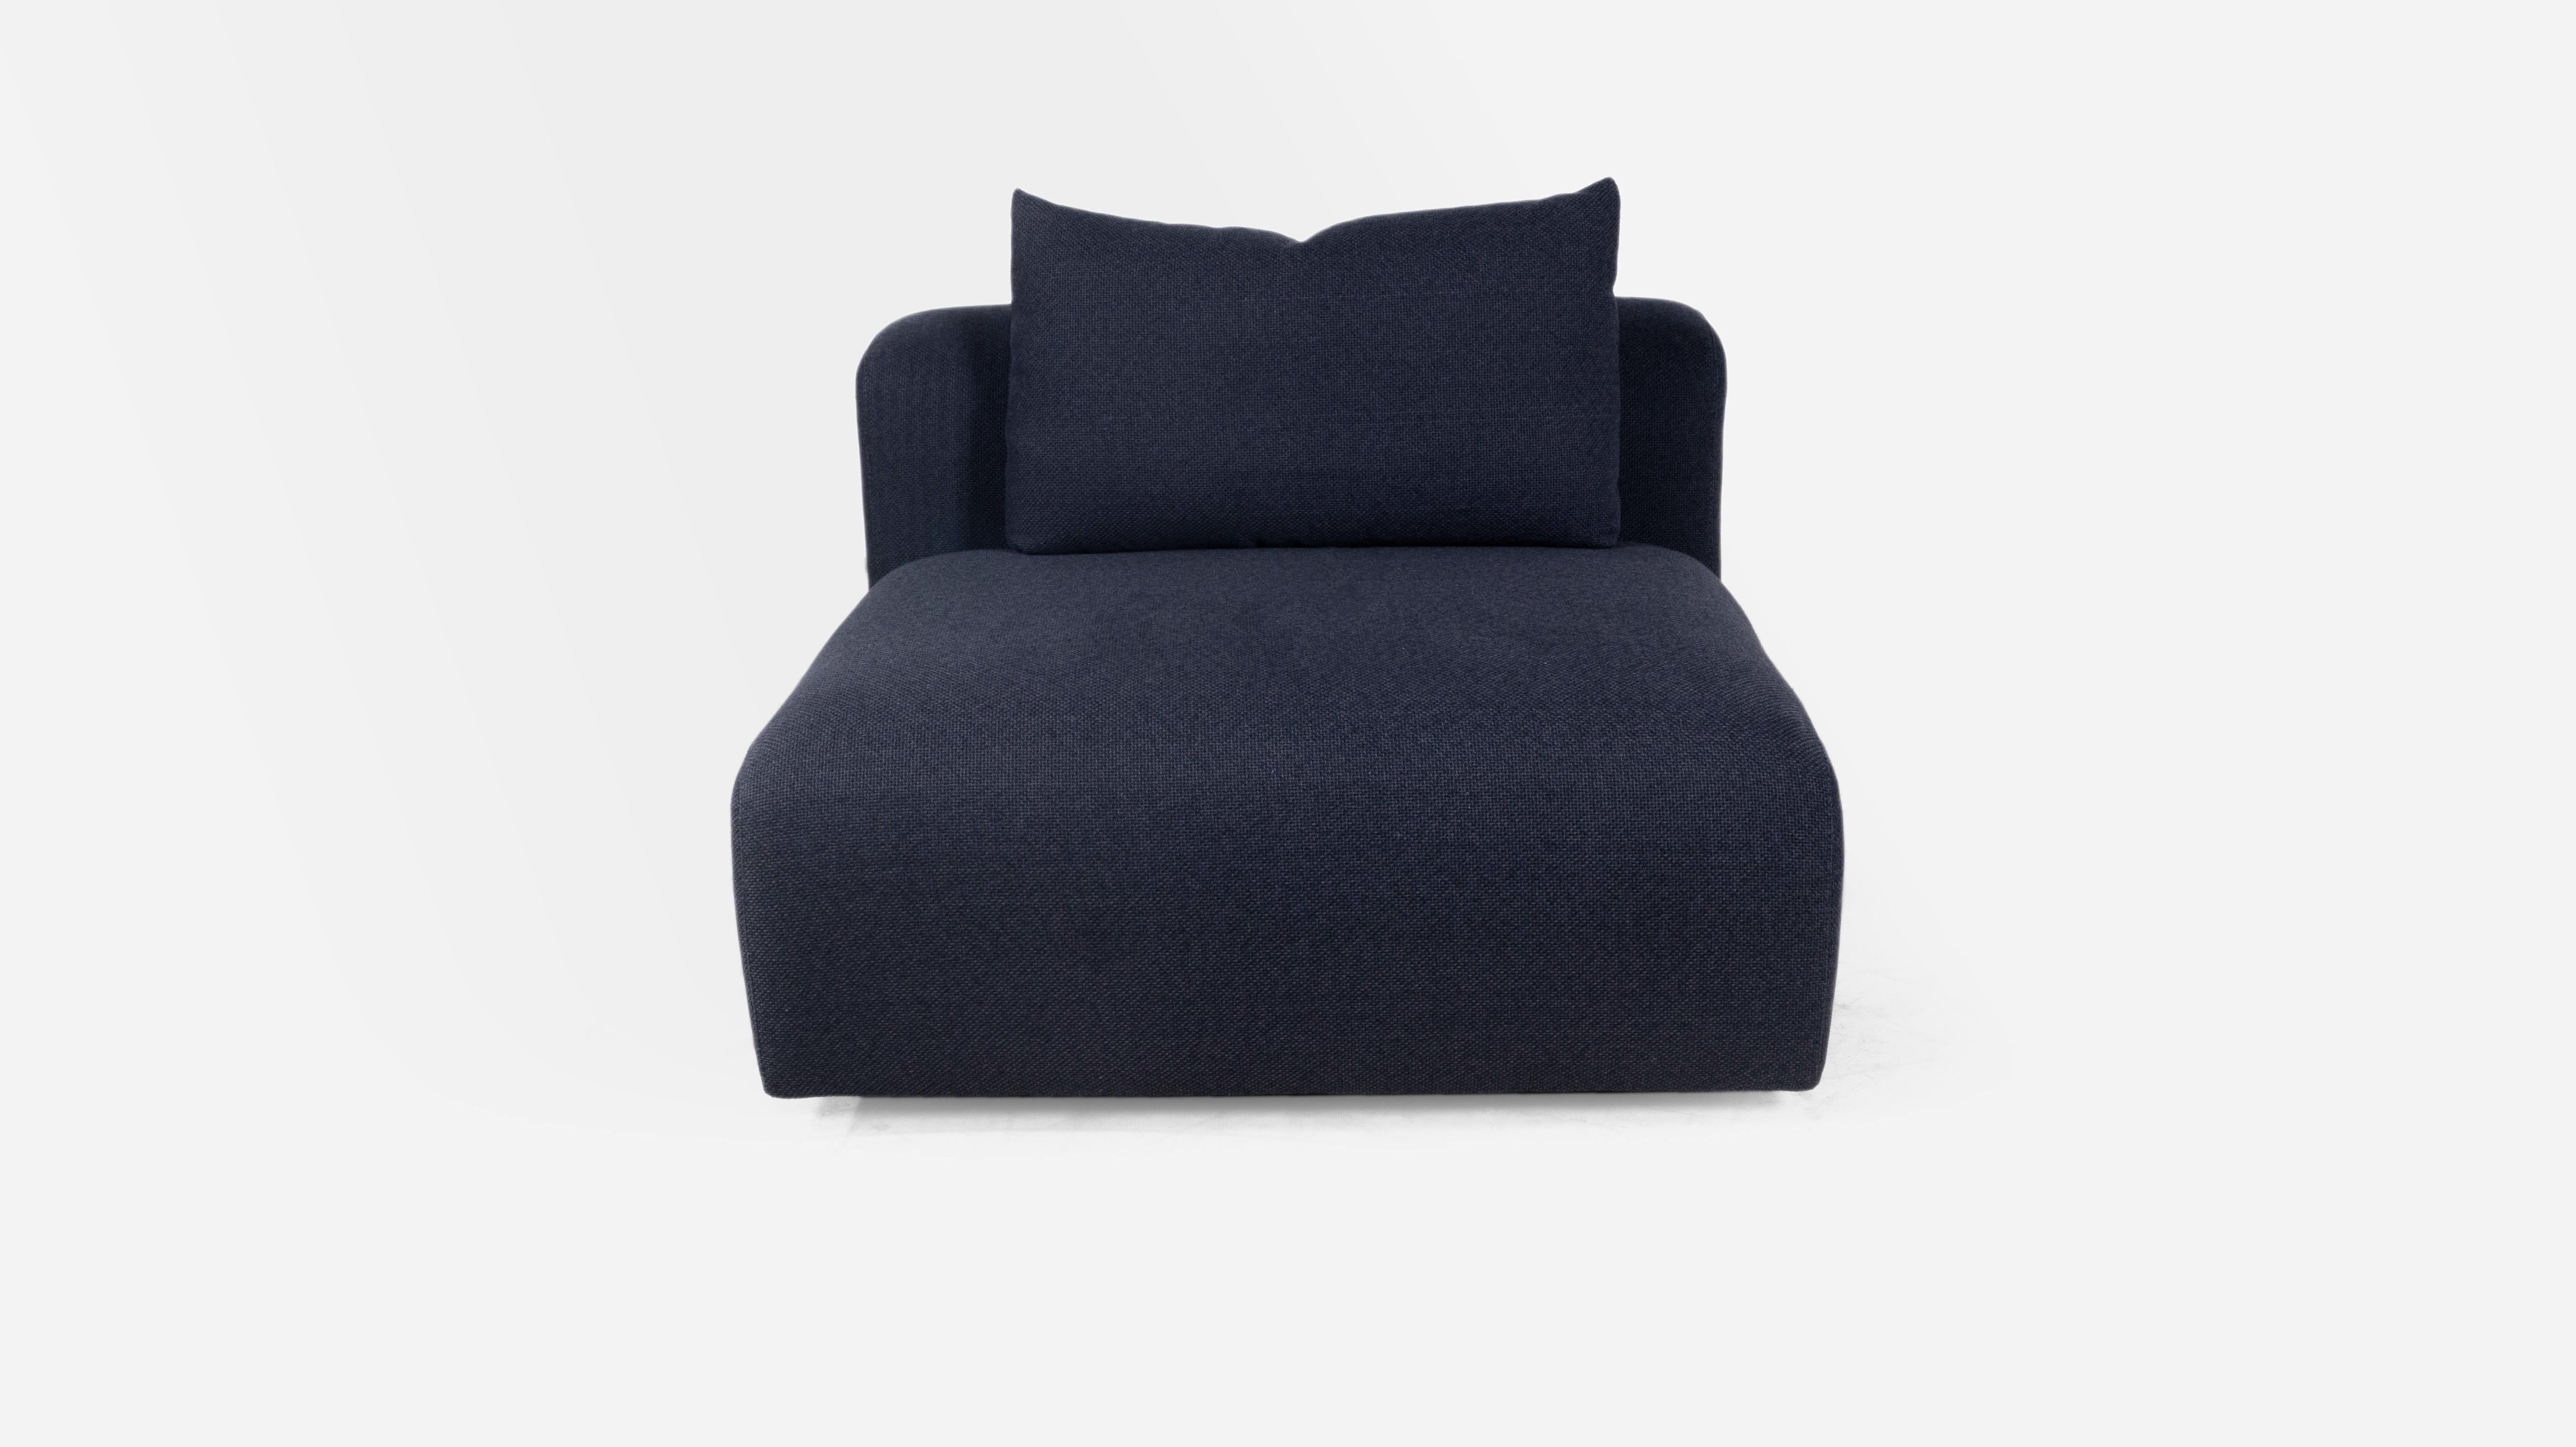 A collection of uniquely soft but sophisticated modular pieces that can be created as a sofa or a robust sofa sectional. Each piece has a loose back knife edge pillow encased in down feathers. The tightly constructed seat cushion is wrapped in